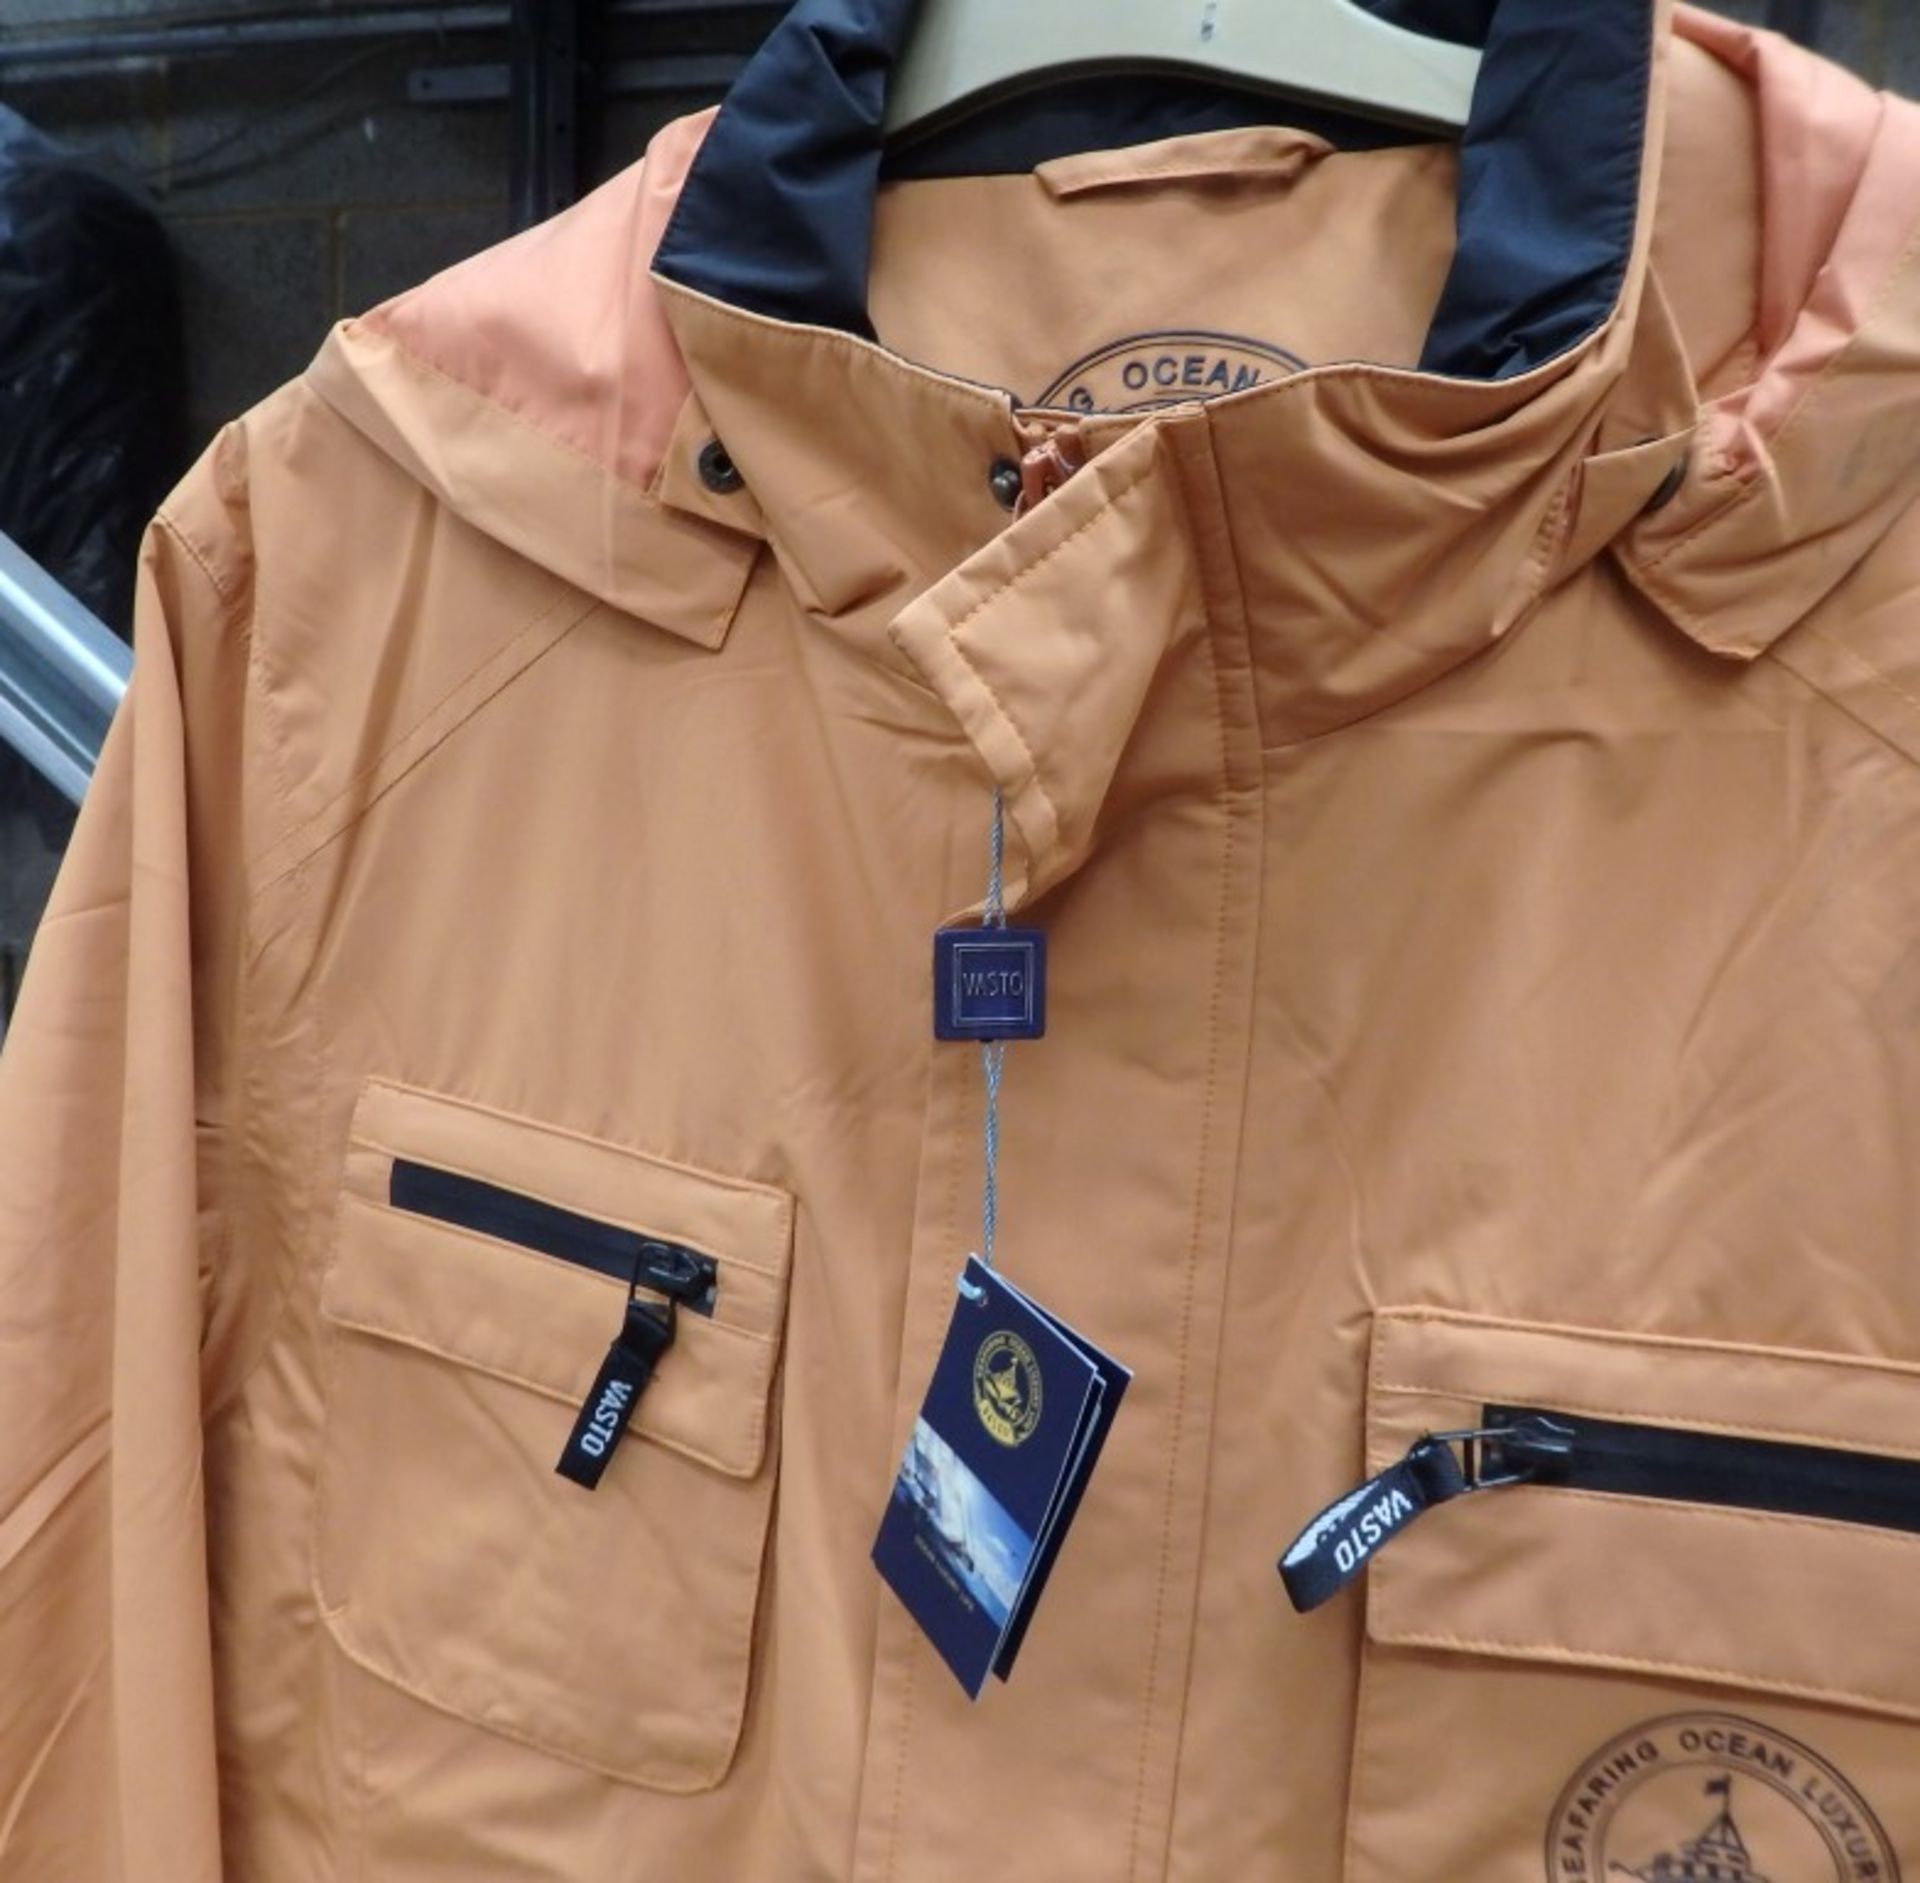 4 x Mens 'Ocean Luxury Life' - Jacket with detachable hood and Internal Zip pockets - Black with Tan - Image 3 of 6